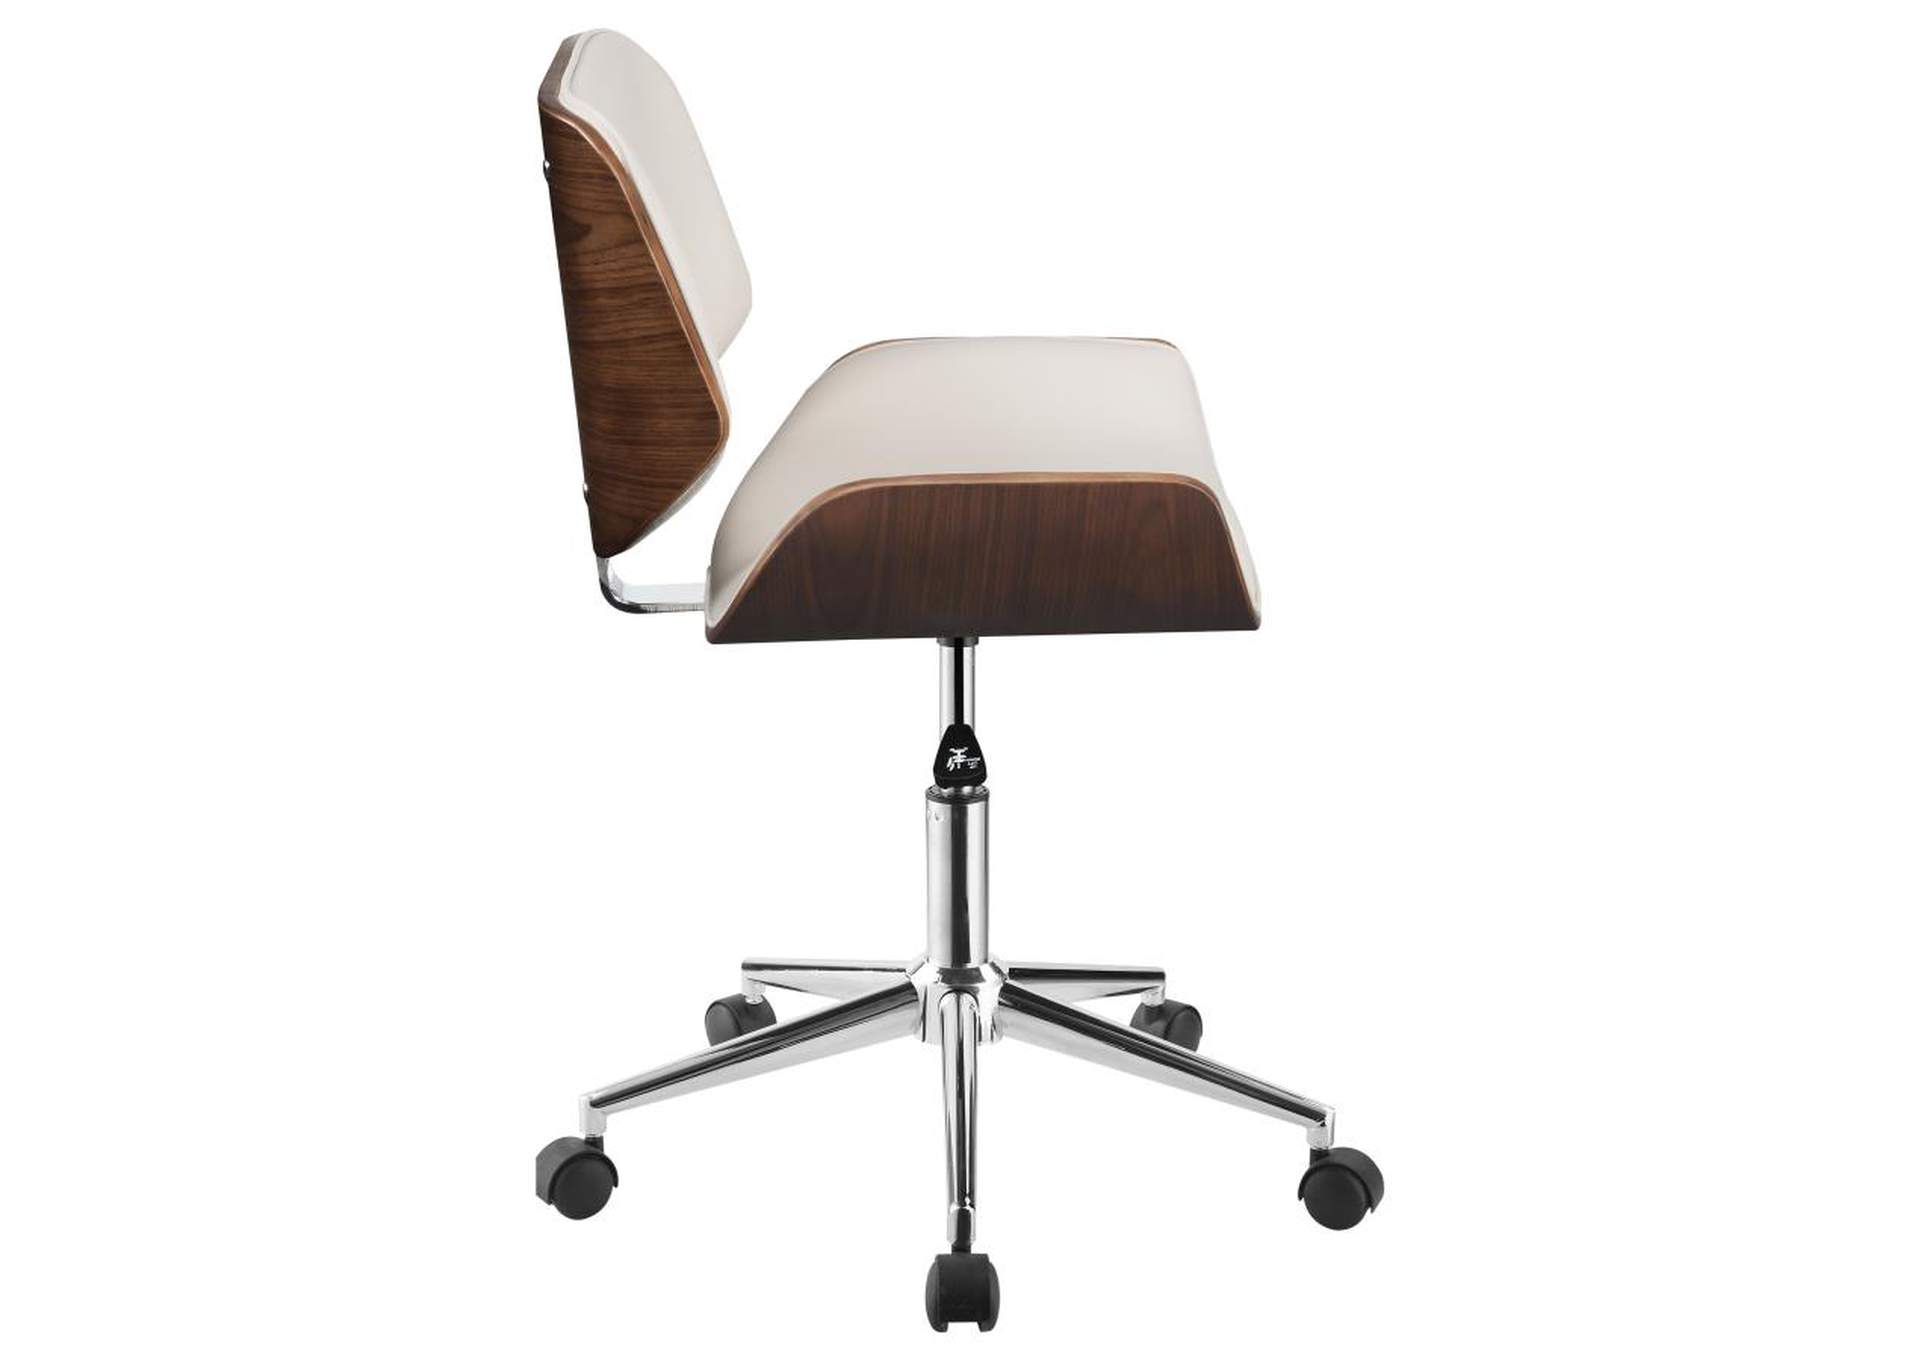 Adjustable Height Office Chair Ecru and Chrome,Coaster Furniture